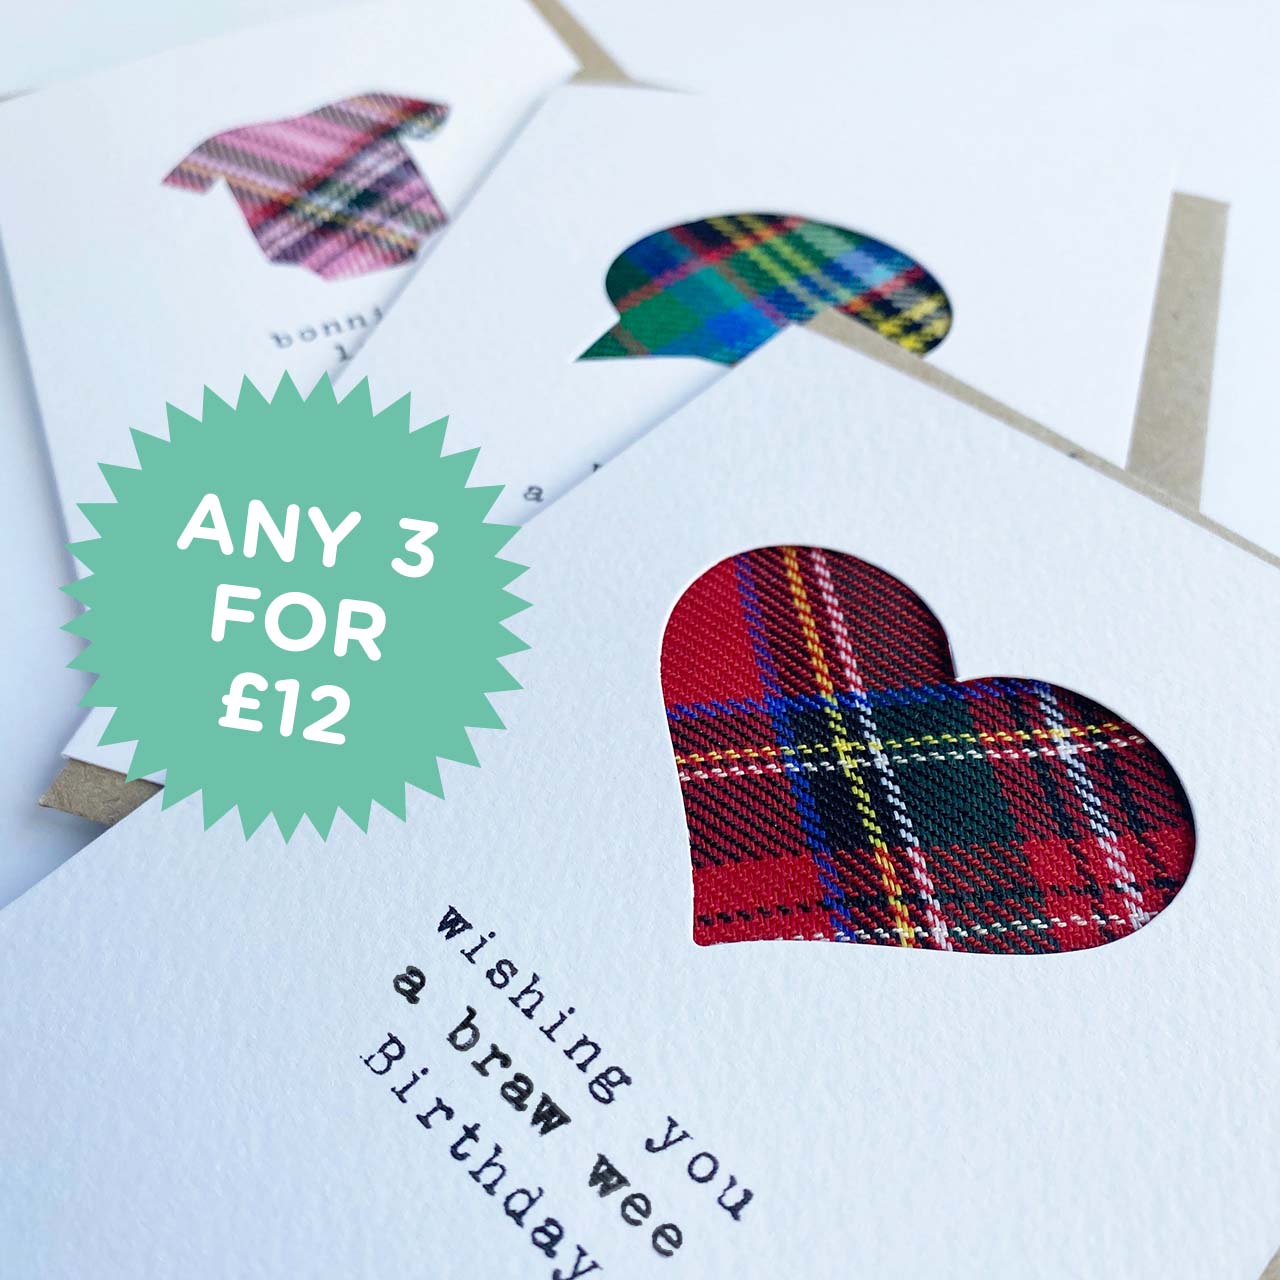 3 handmade scottish greeting cards with tartan and 3 for £12 deal 